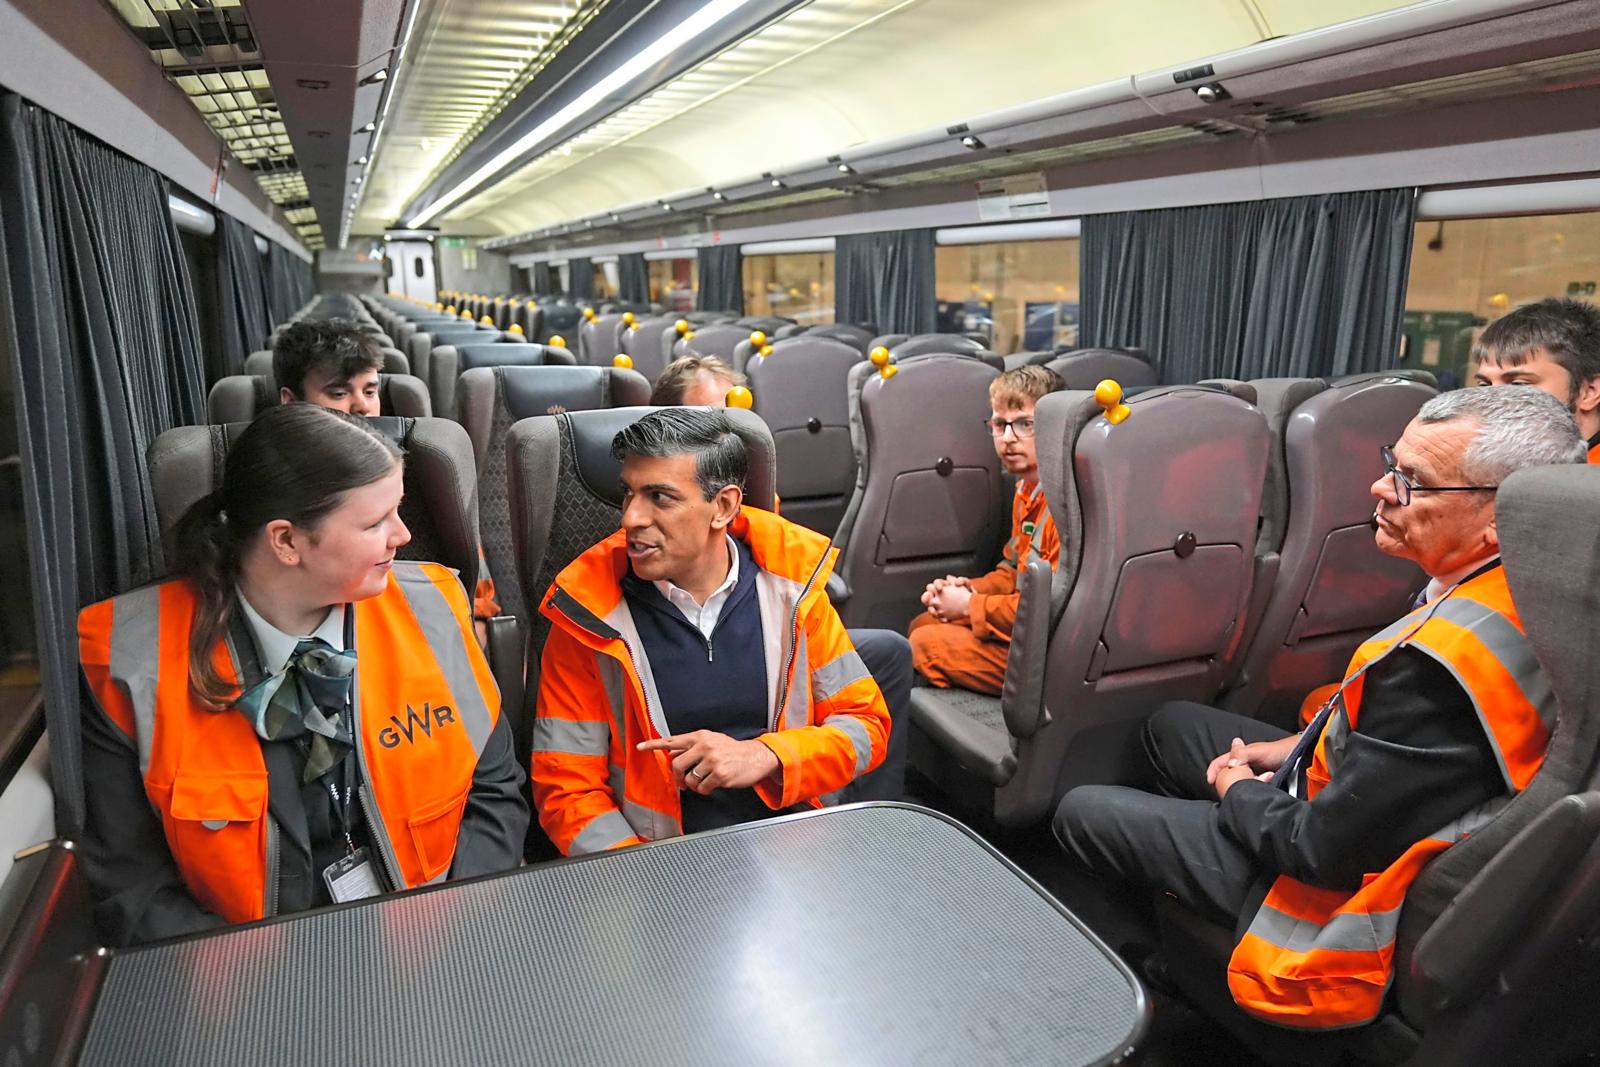 Prime Minister Rishi Sunak took the Sleeper on his visit to the GWR traction maintenance depot in Penzance on May 29, while on the campaign trail. ALAMY